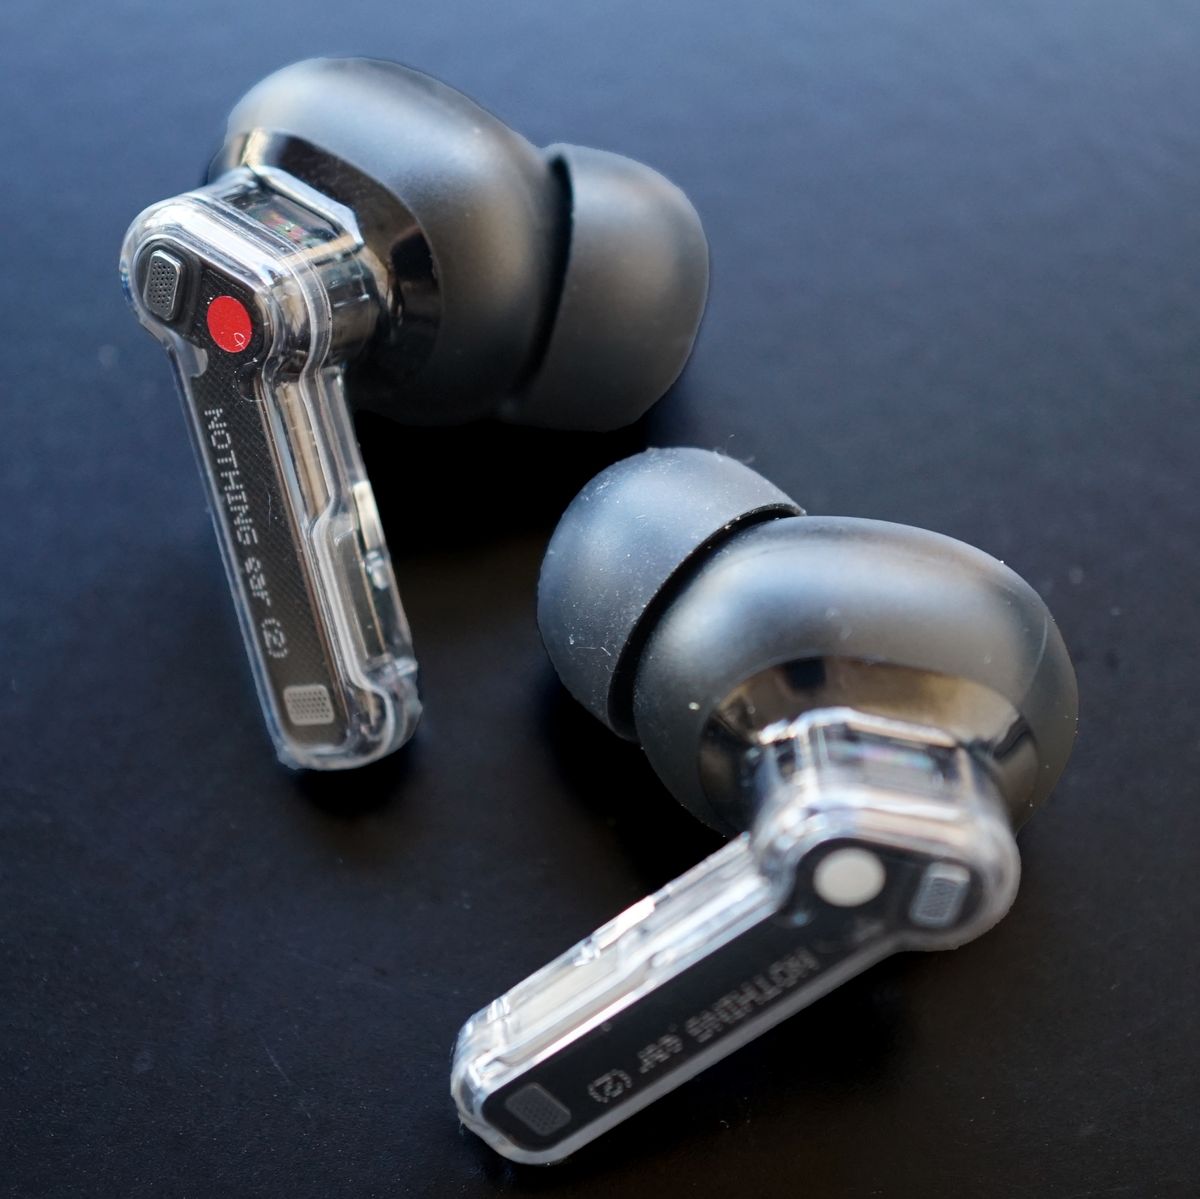 Nothing Ear 2 review: it's what's on the inside that counts - The Verge